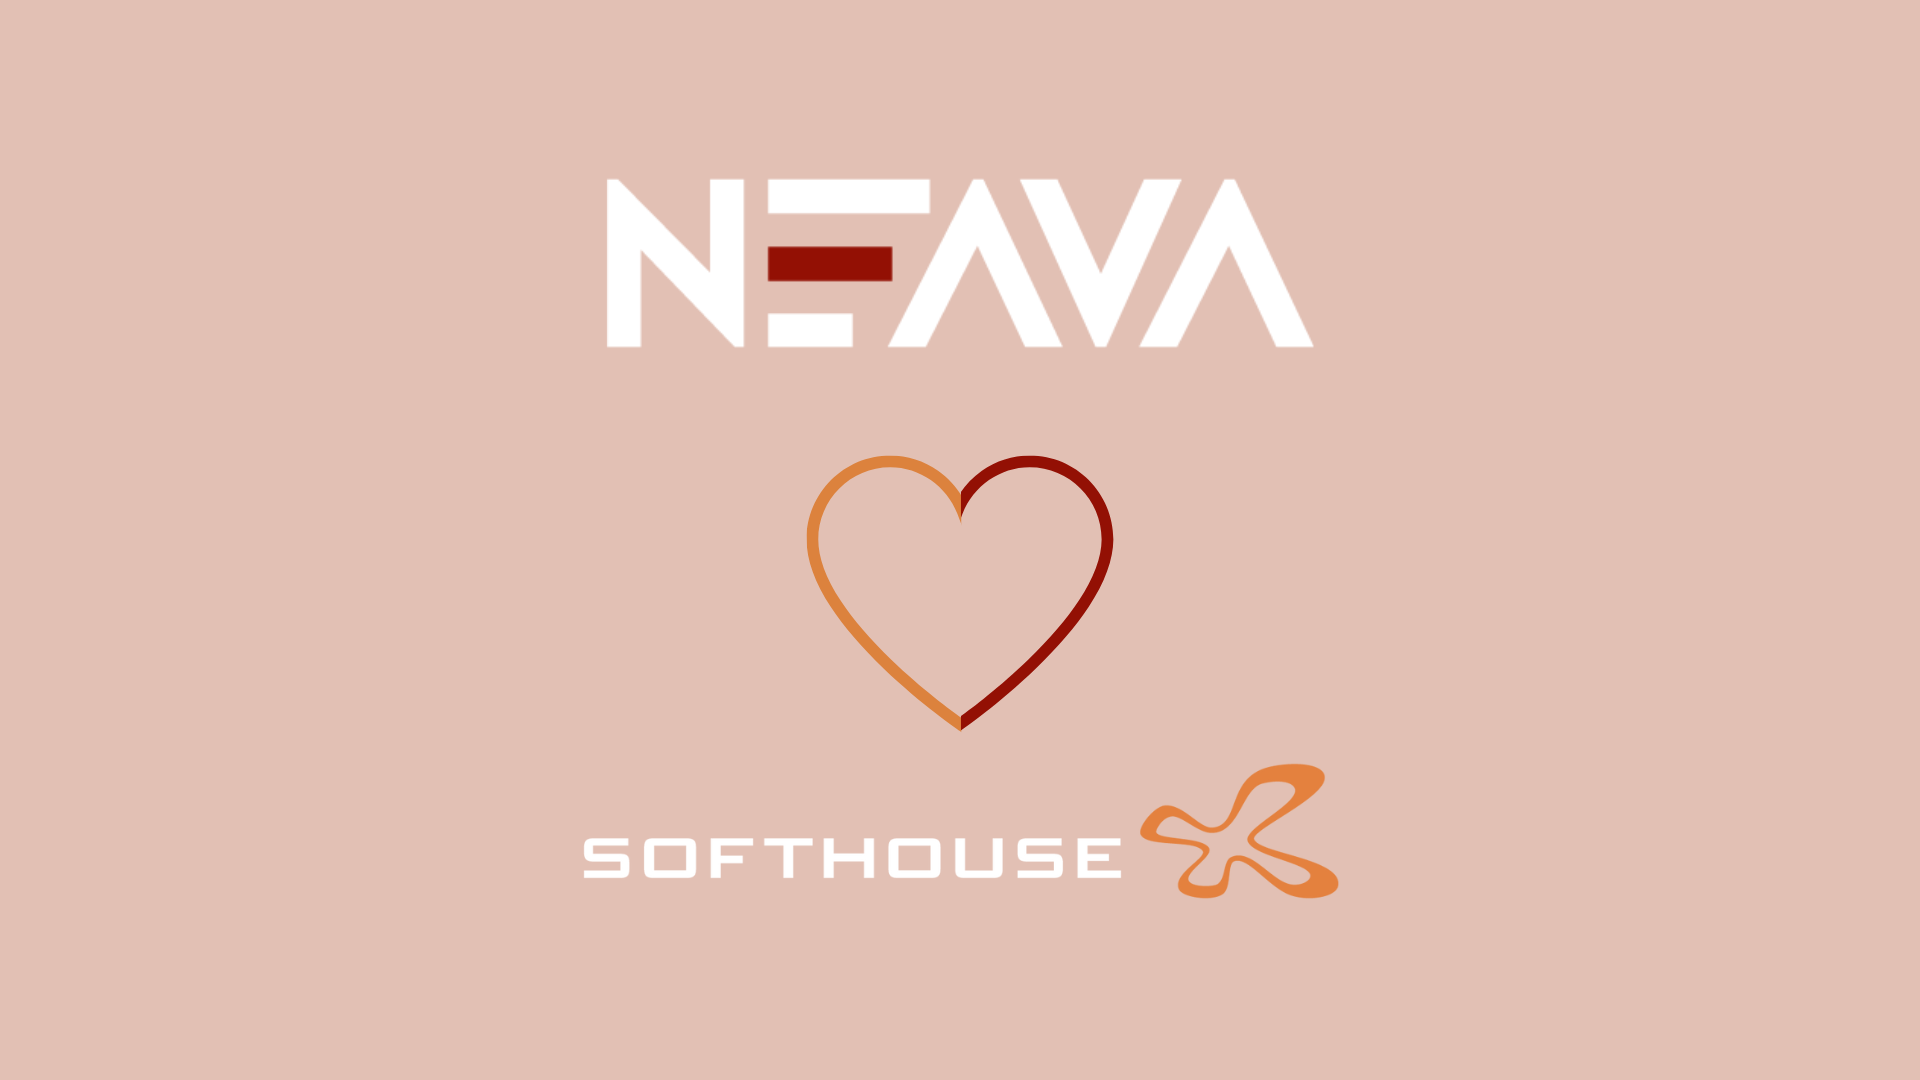 Neava is now a part of Softhouse!